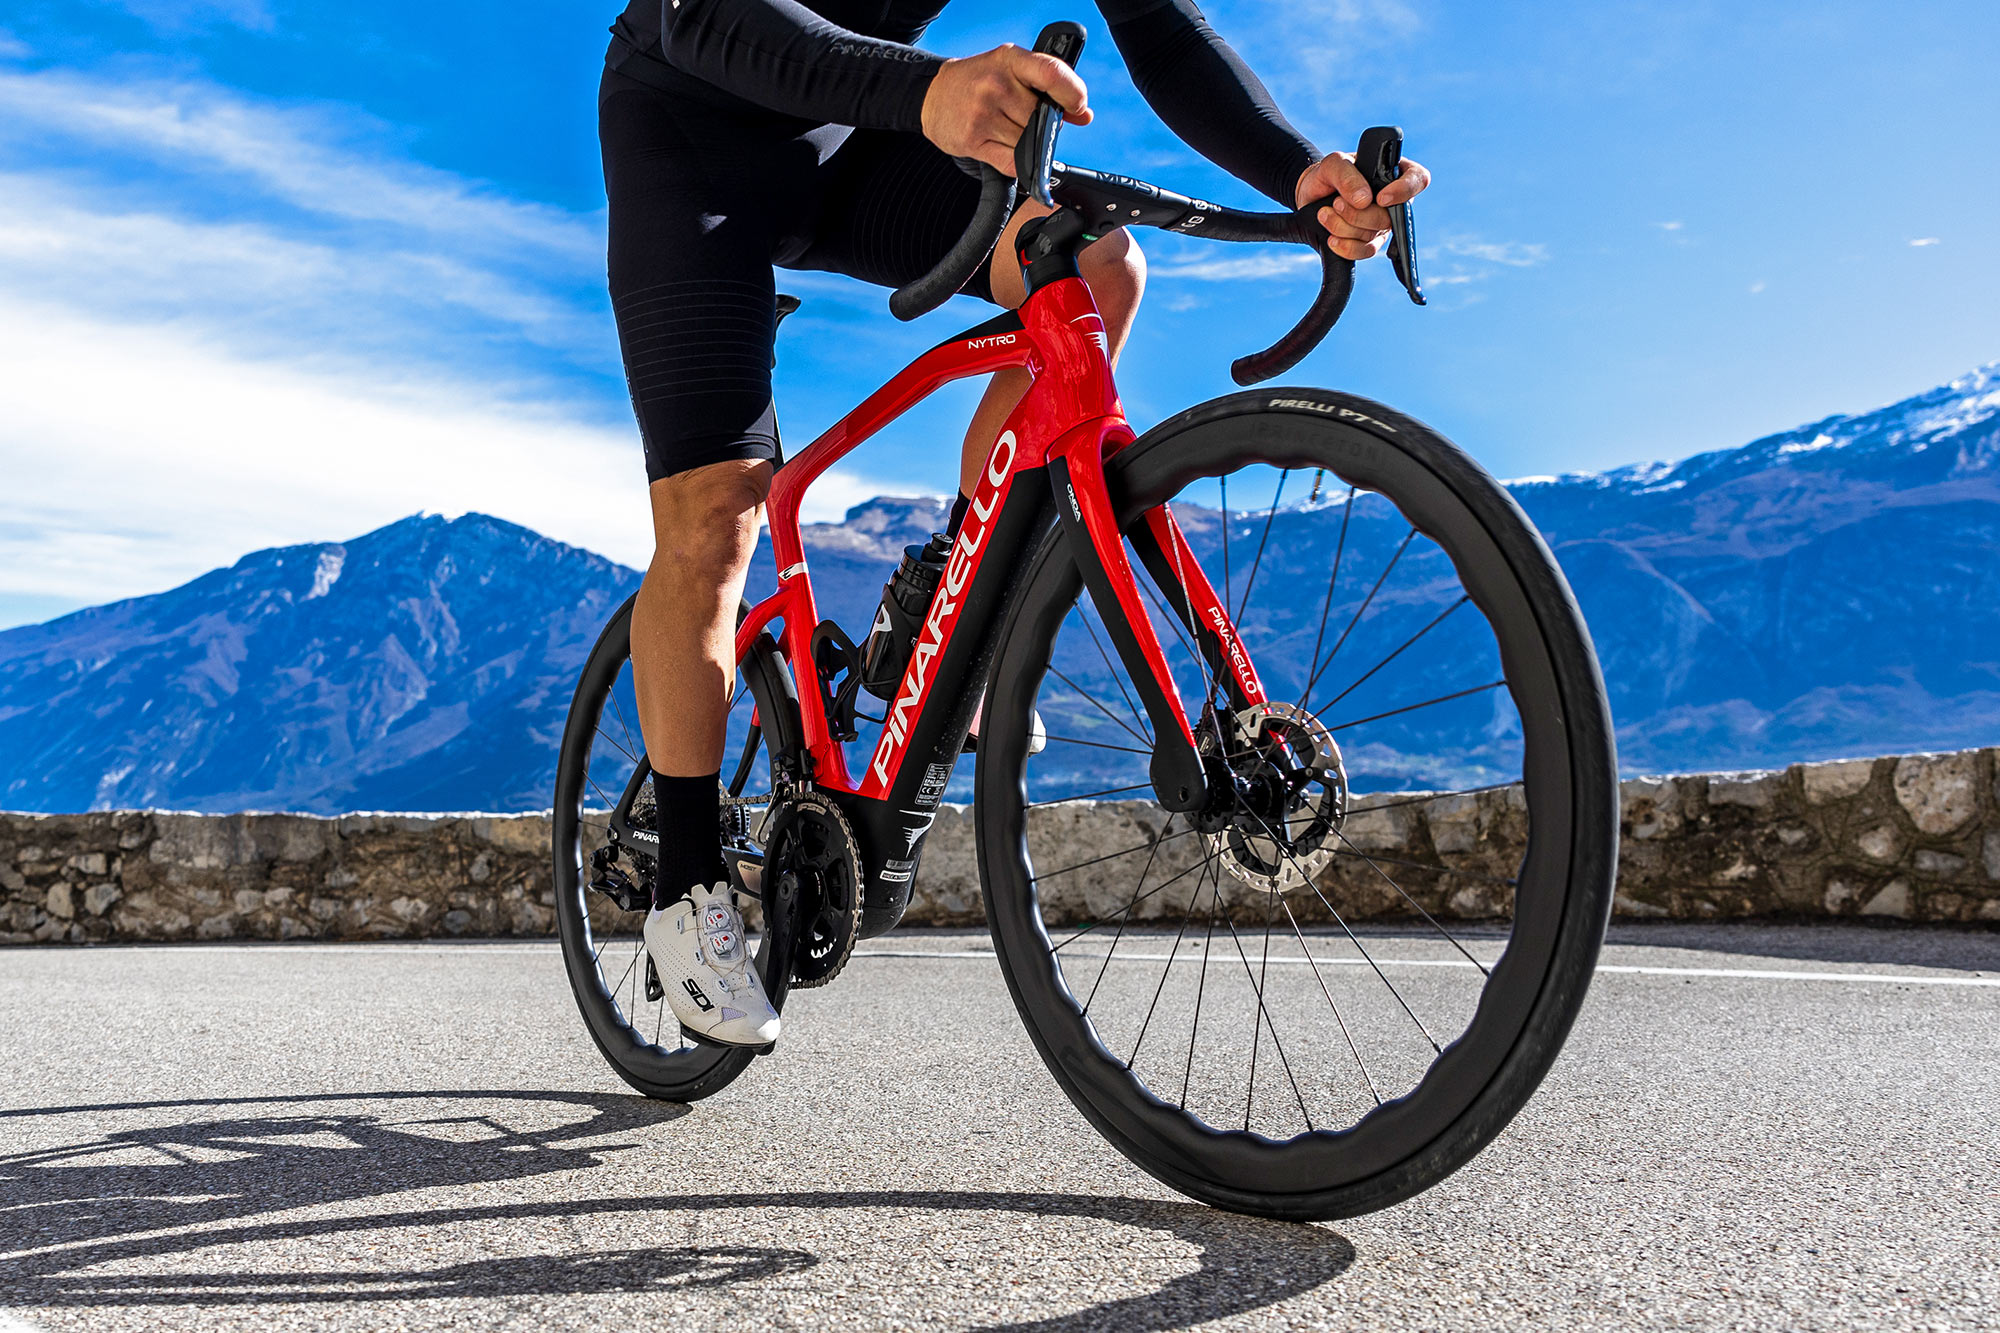 Pinarello NYTRO Carbon Red 936 electric road bike – a real